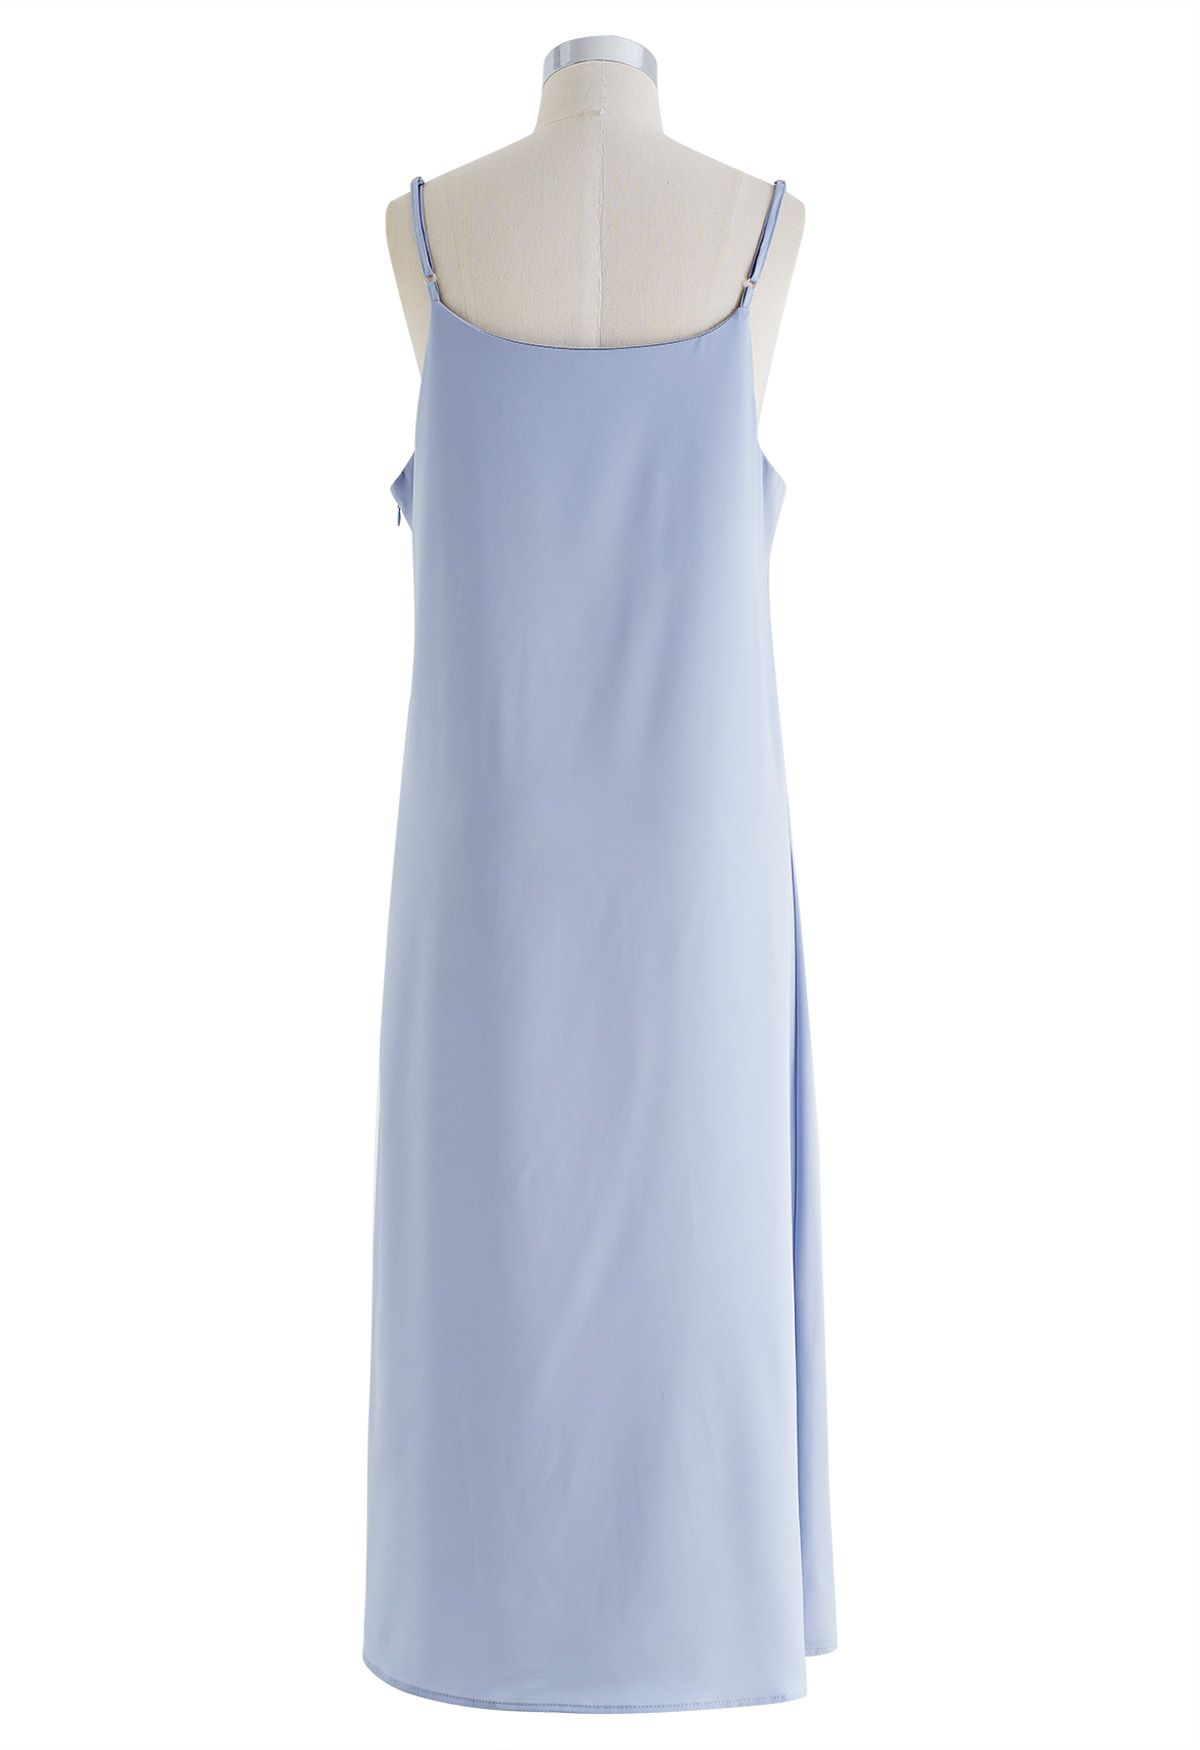 Sweetheart Neck Side Twisted Satin Cami Dress in Blue - Retro, Indie ...